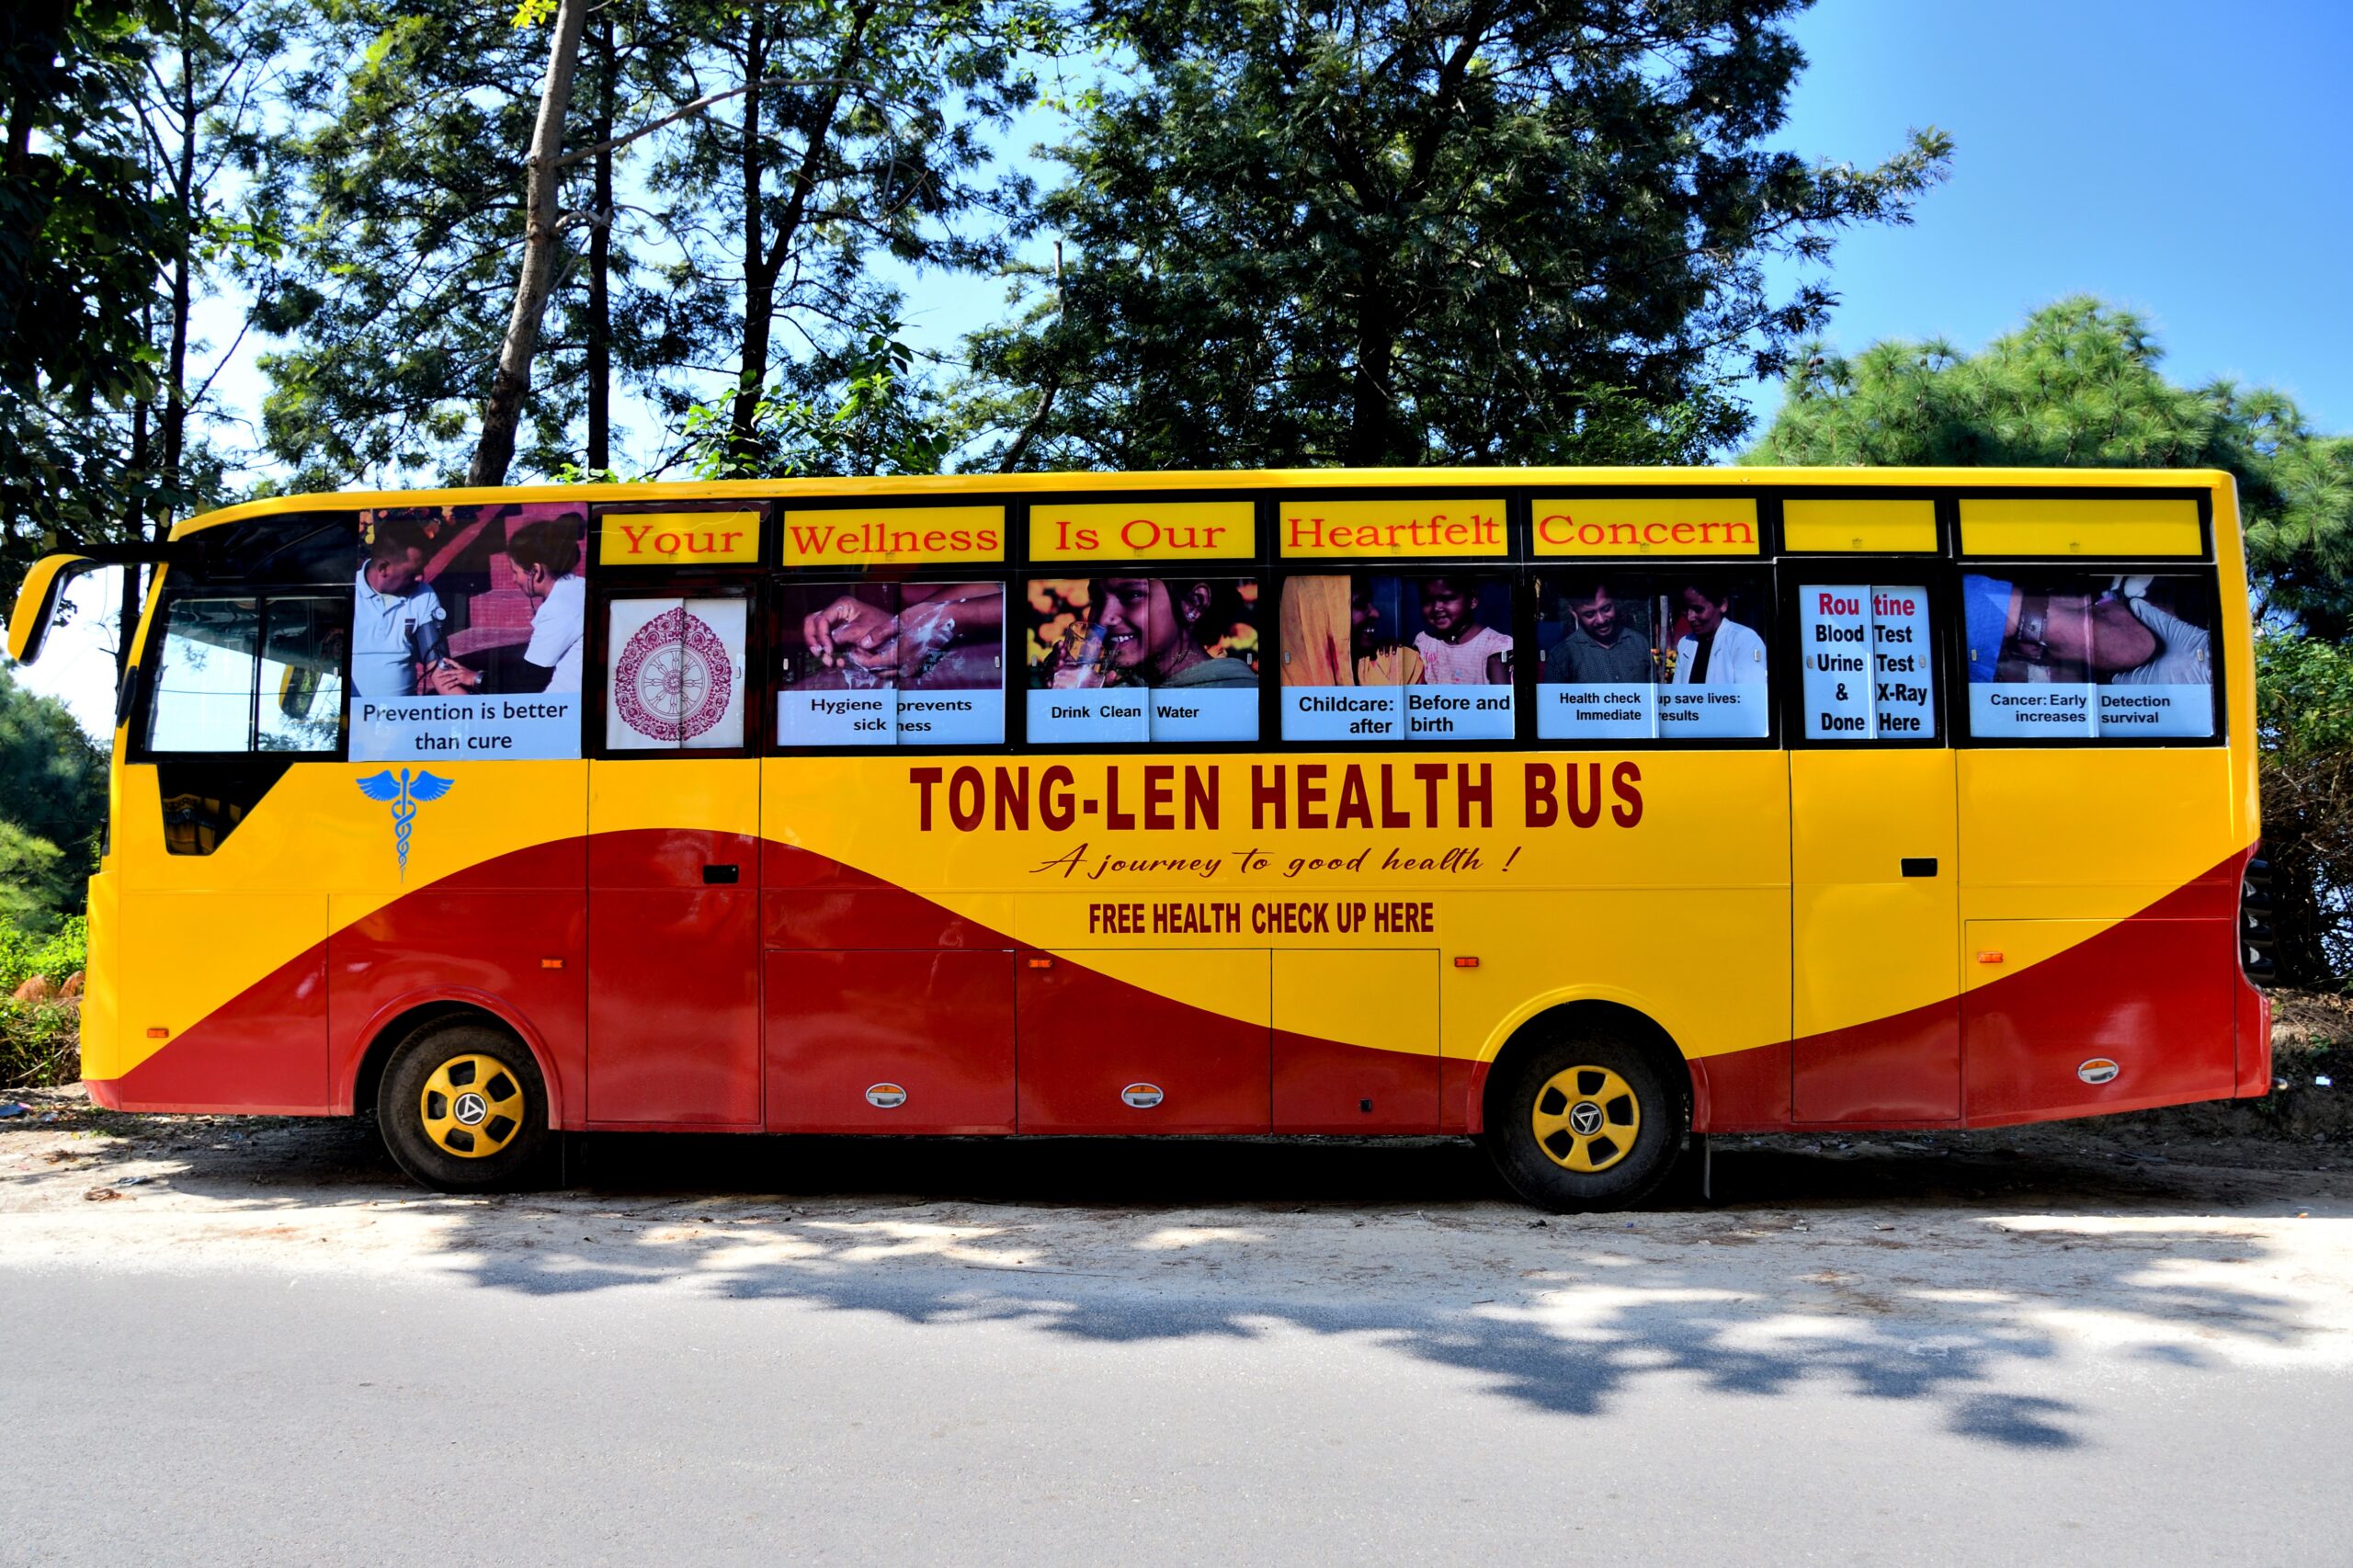 The new health bus